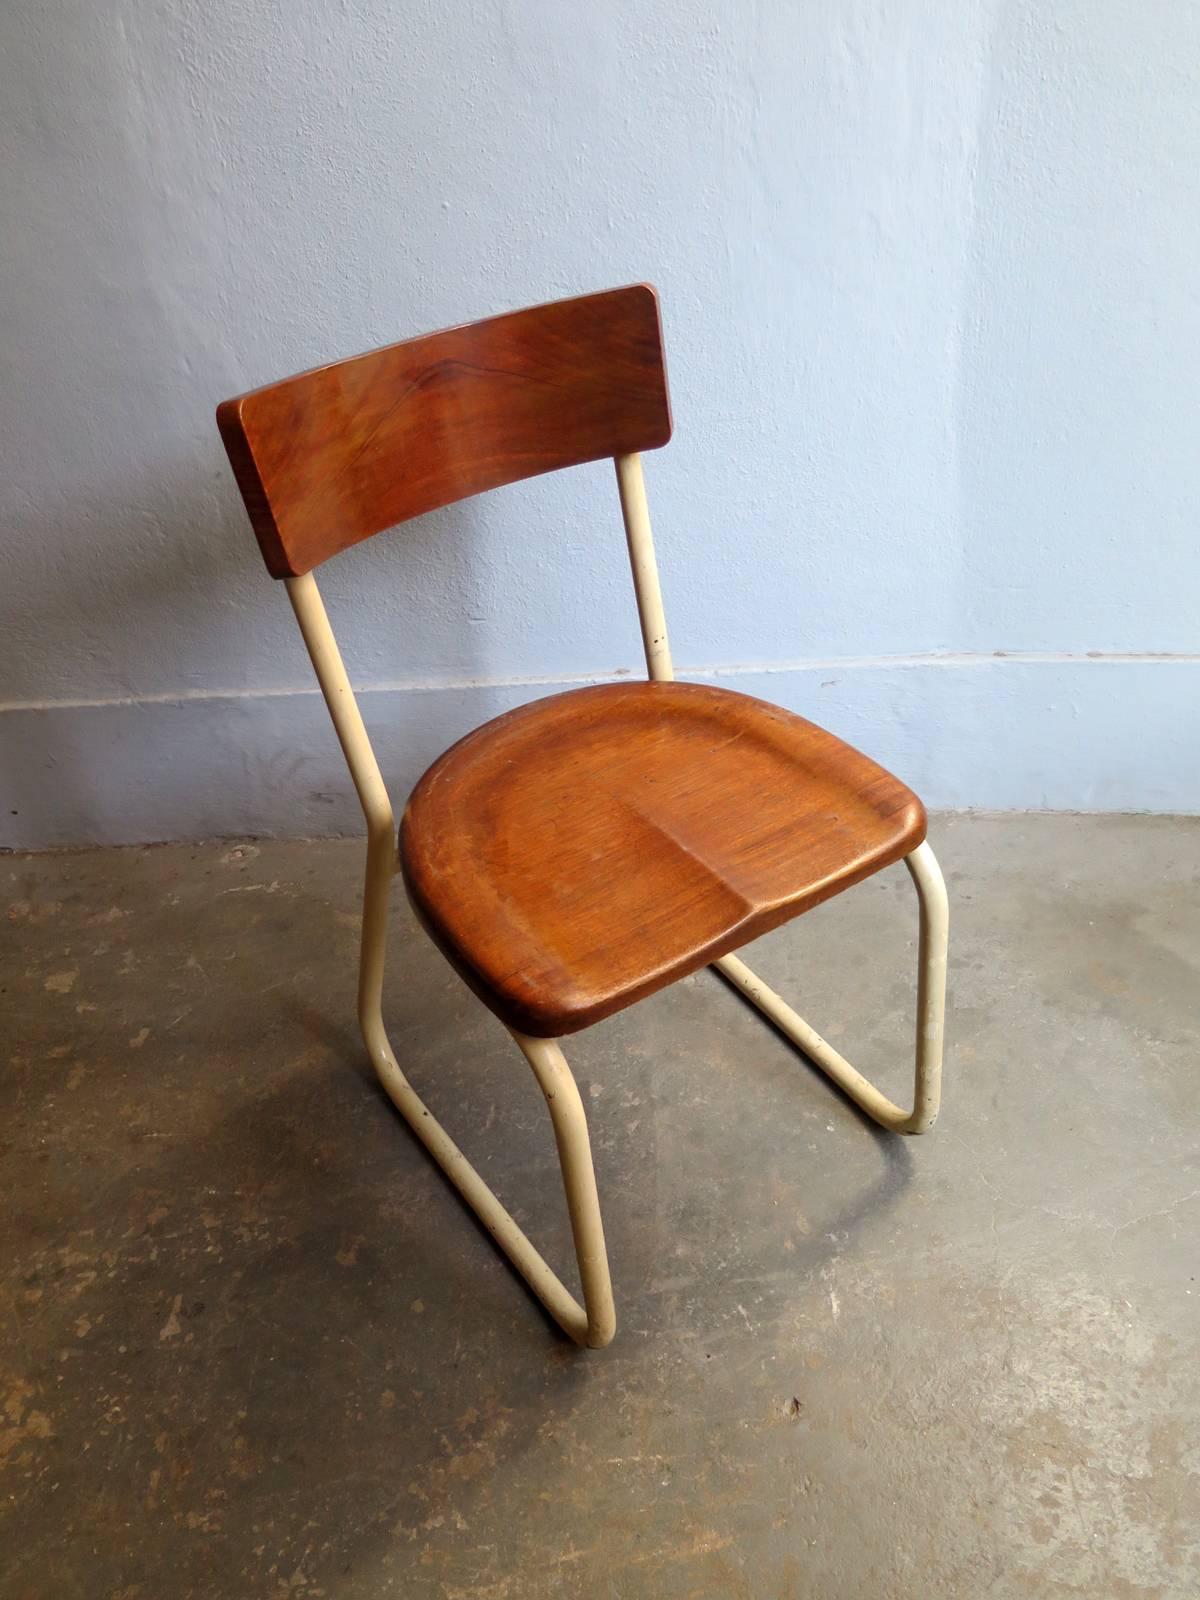 Industrial wooden and metal chair.